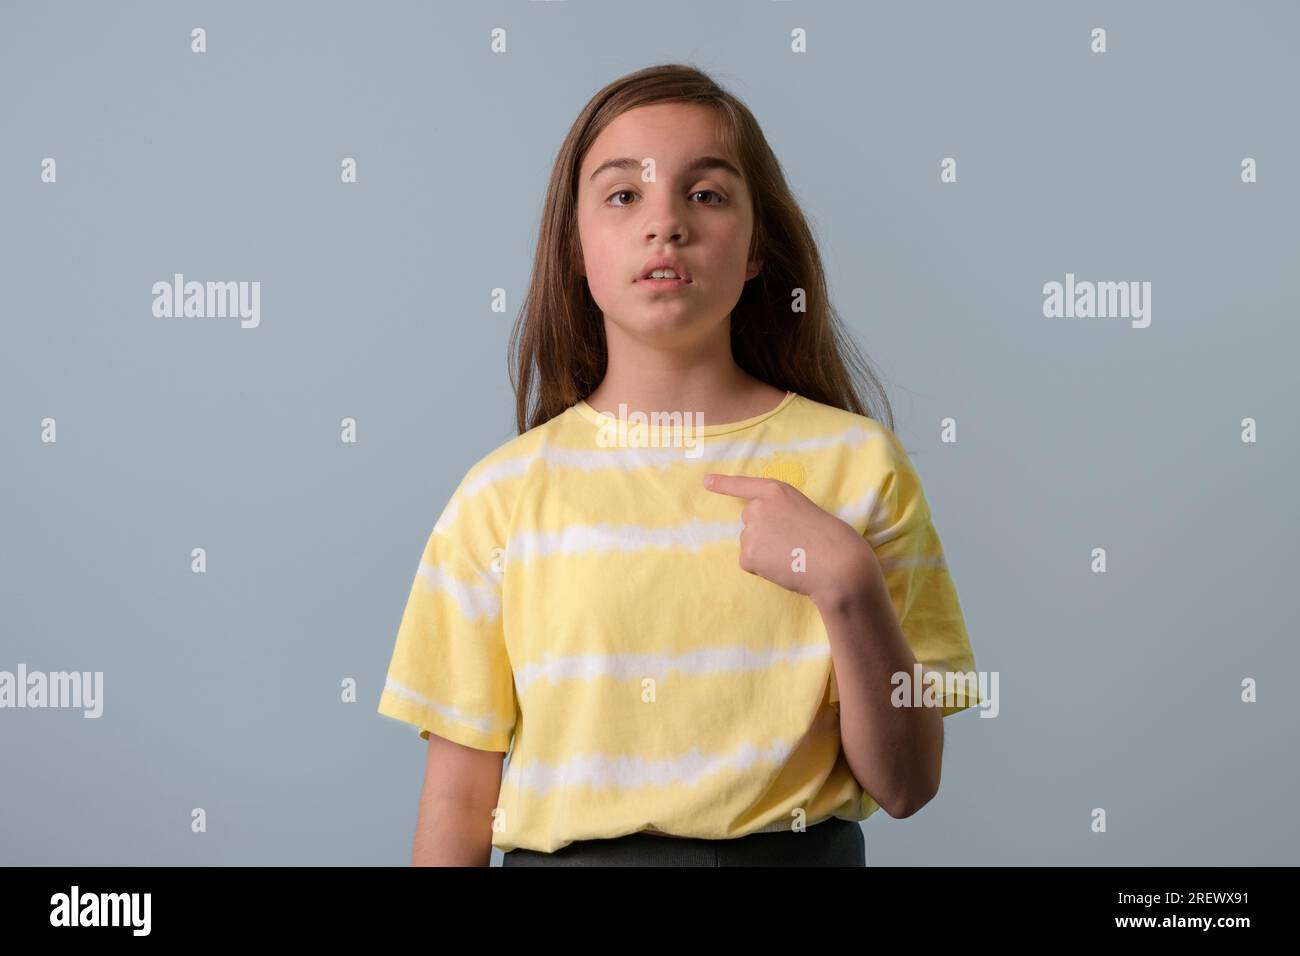 Why me. A teenage girl points her finger at herself. Questioning look. Yellow T-shirt. Gray background Stock Photo